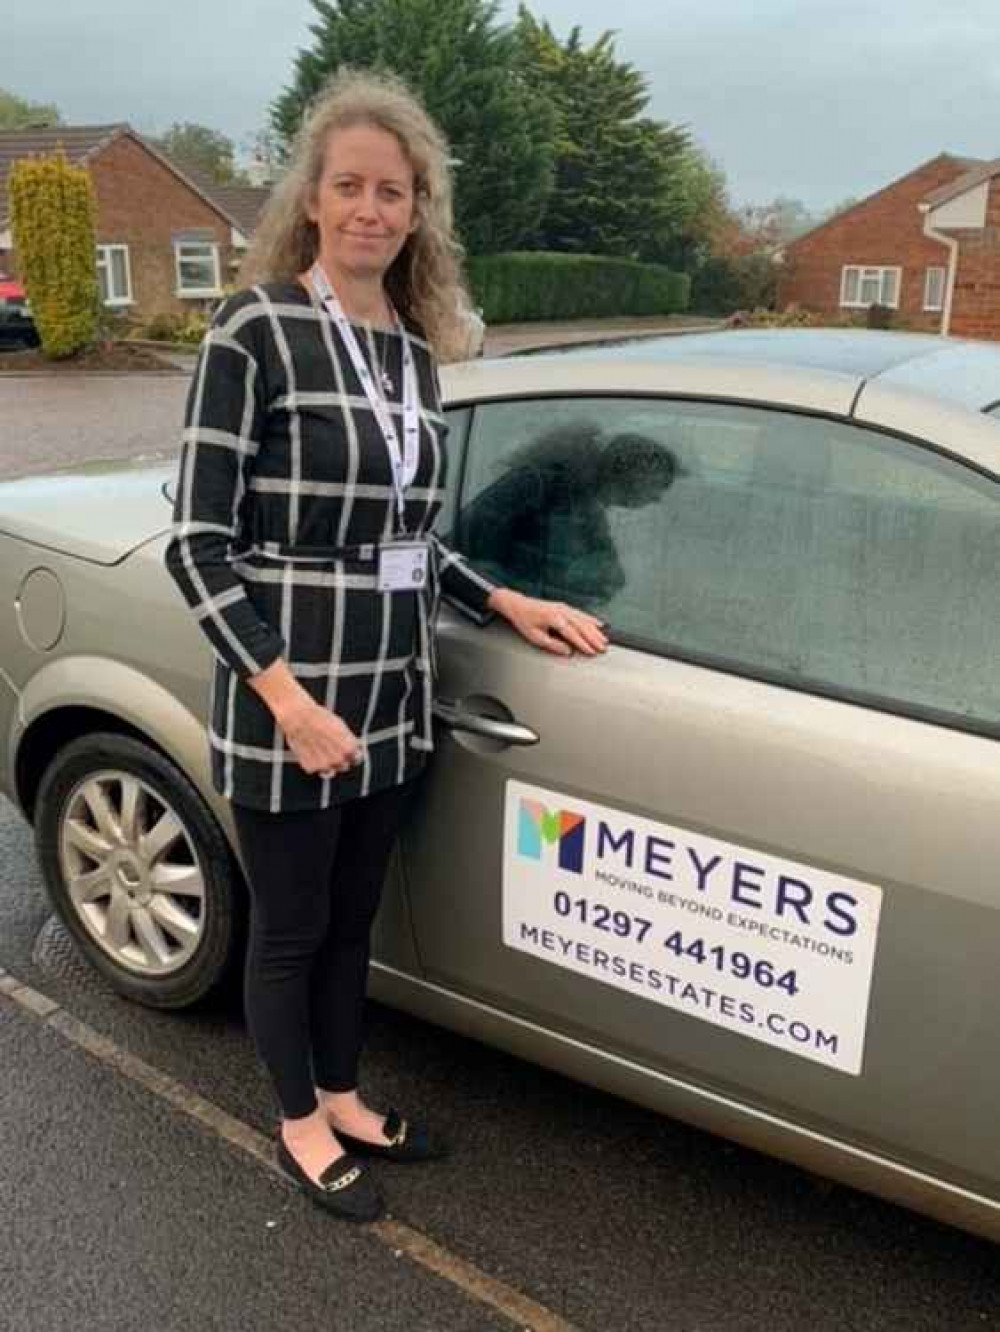 Fran Ponting has launched the first Meyers Estate Agents branch in Devon